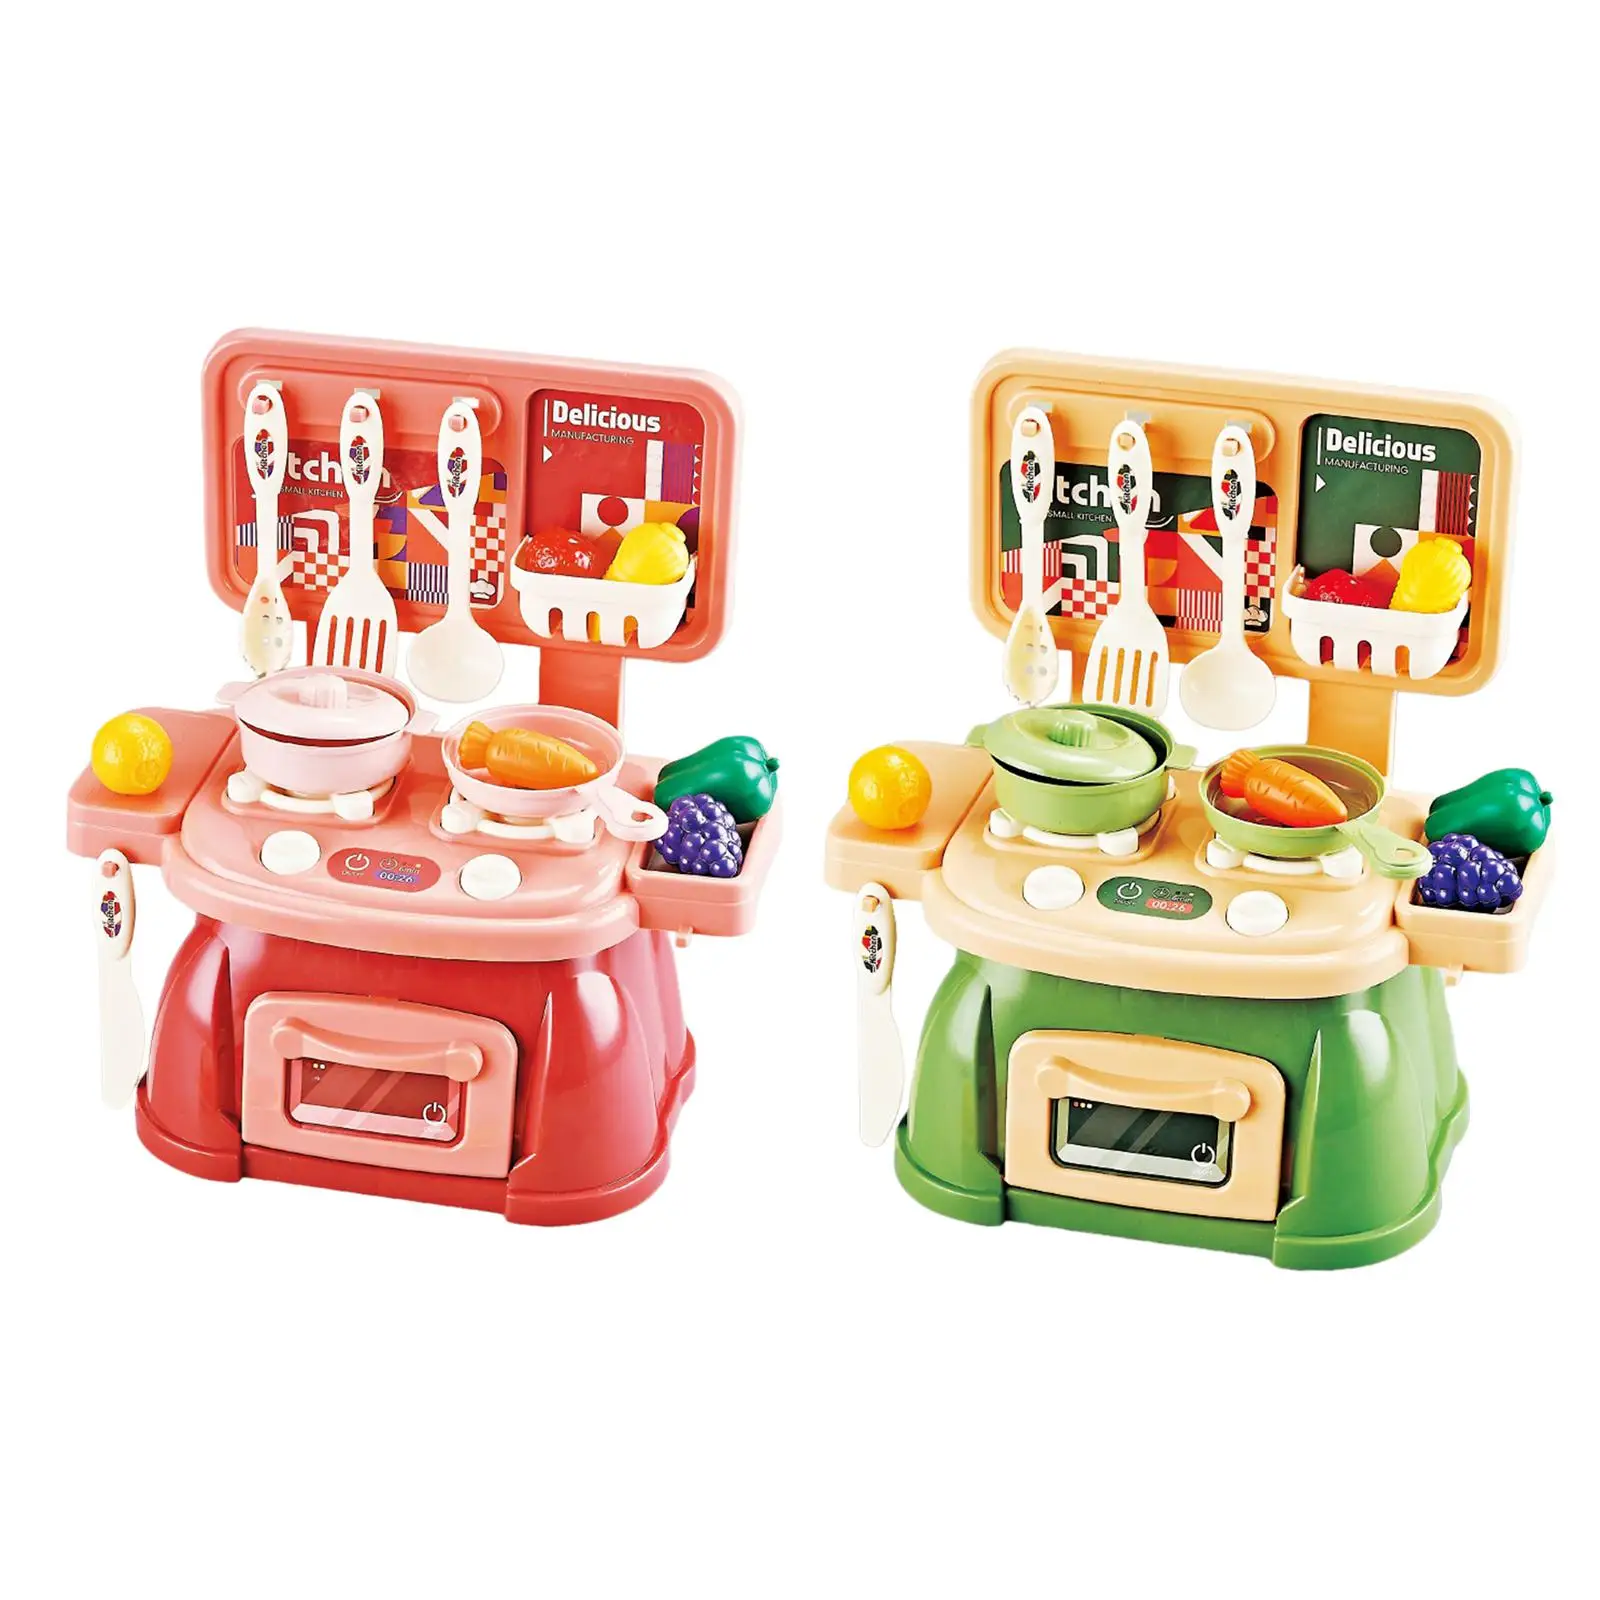 

30x Kitchen Playset Toy Learning Skill Toy Realistic Pretend Cooking Playset for Game Play Kitchen Outdoor Party Favor Dollhouse